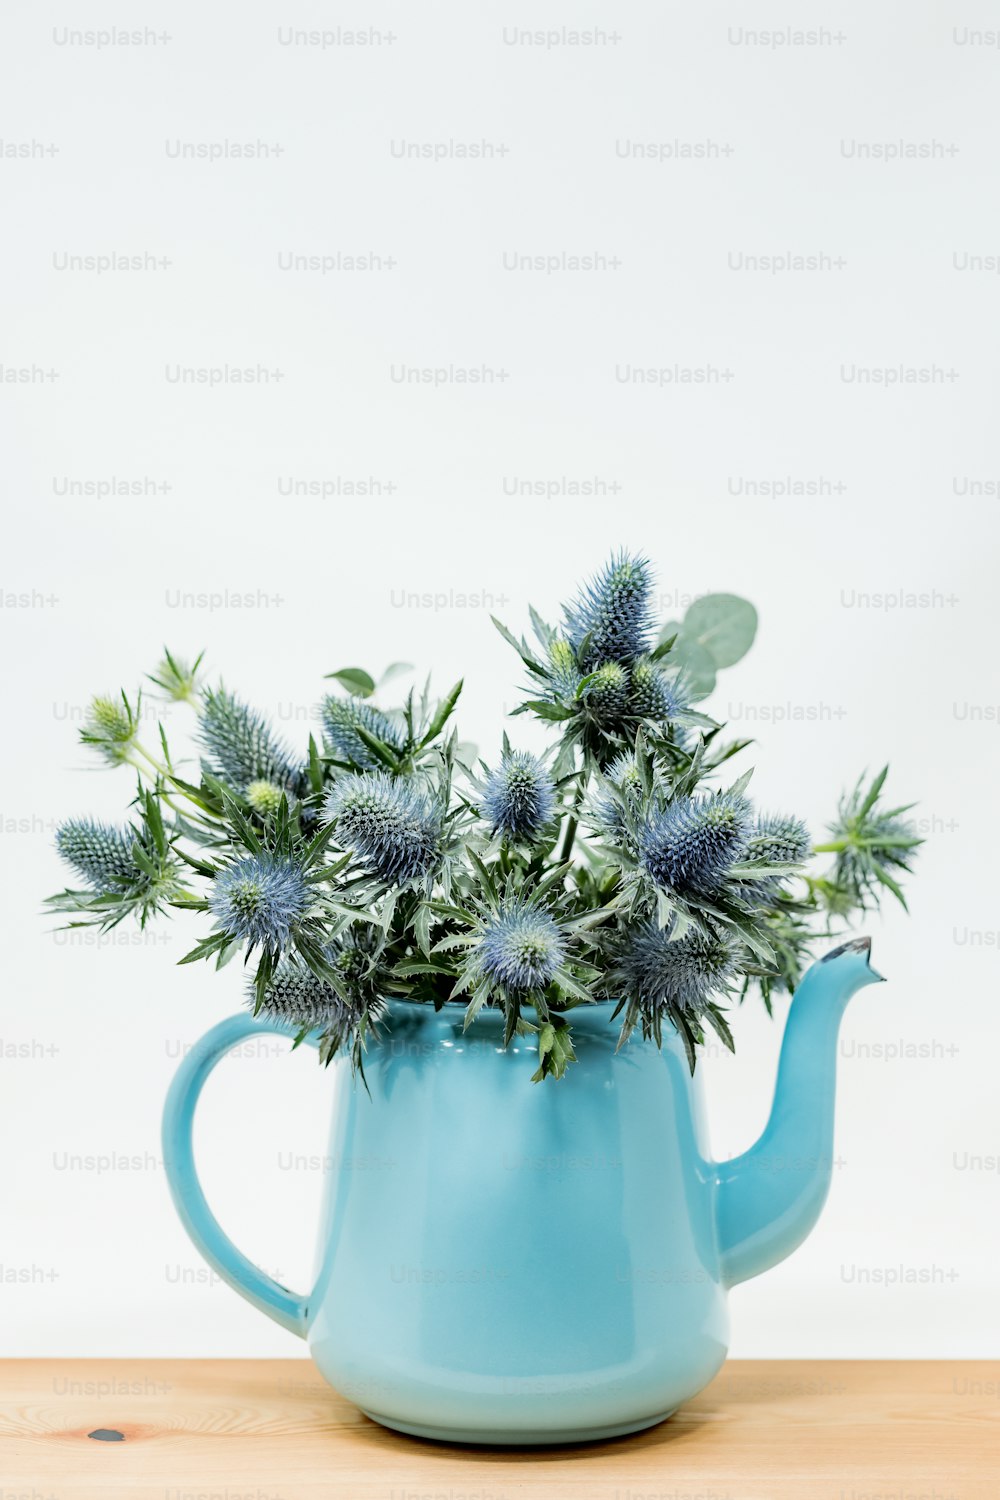 a blue watering can filled with blue flowers